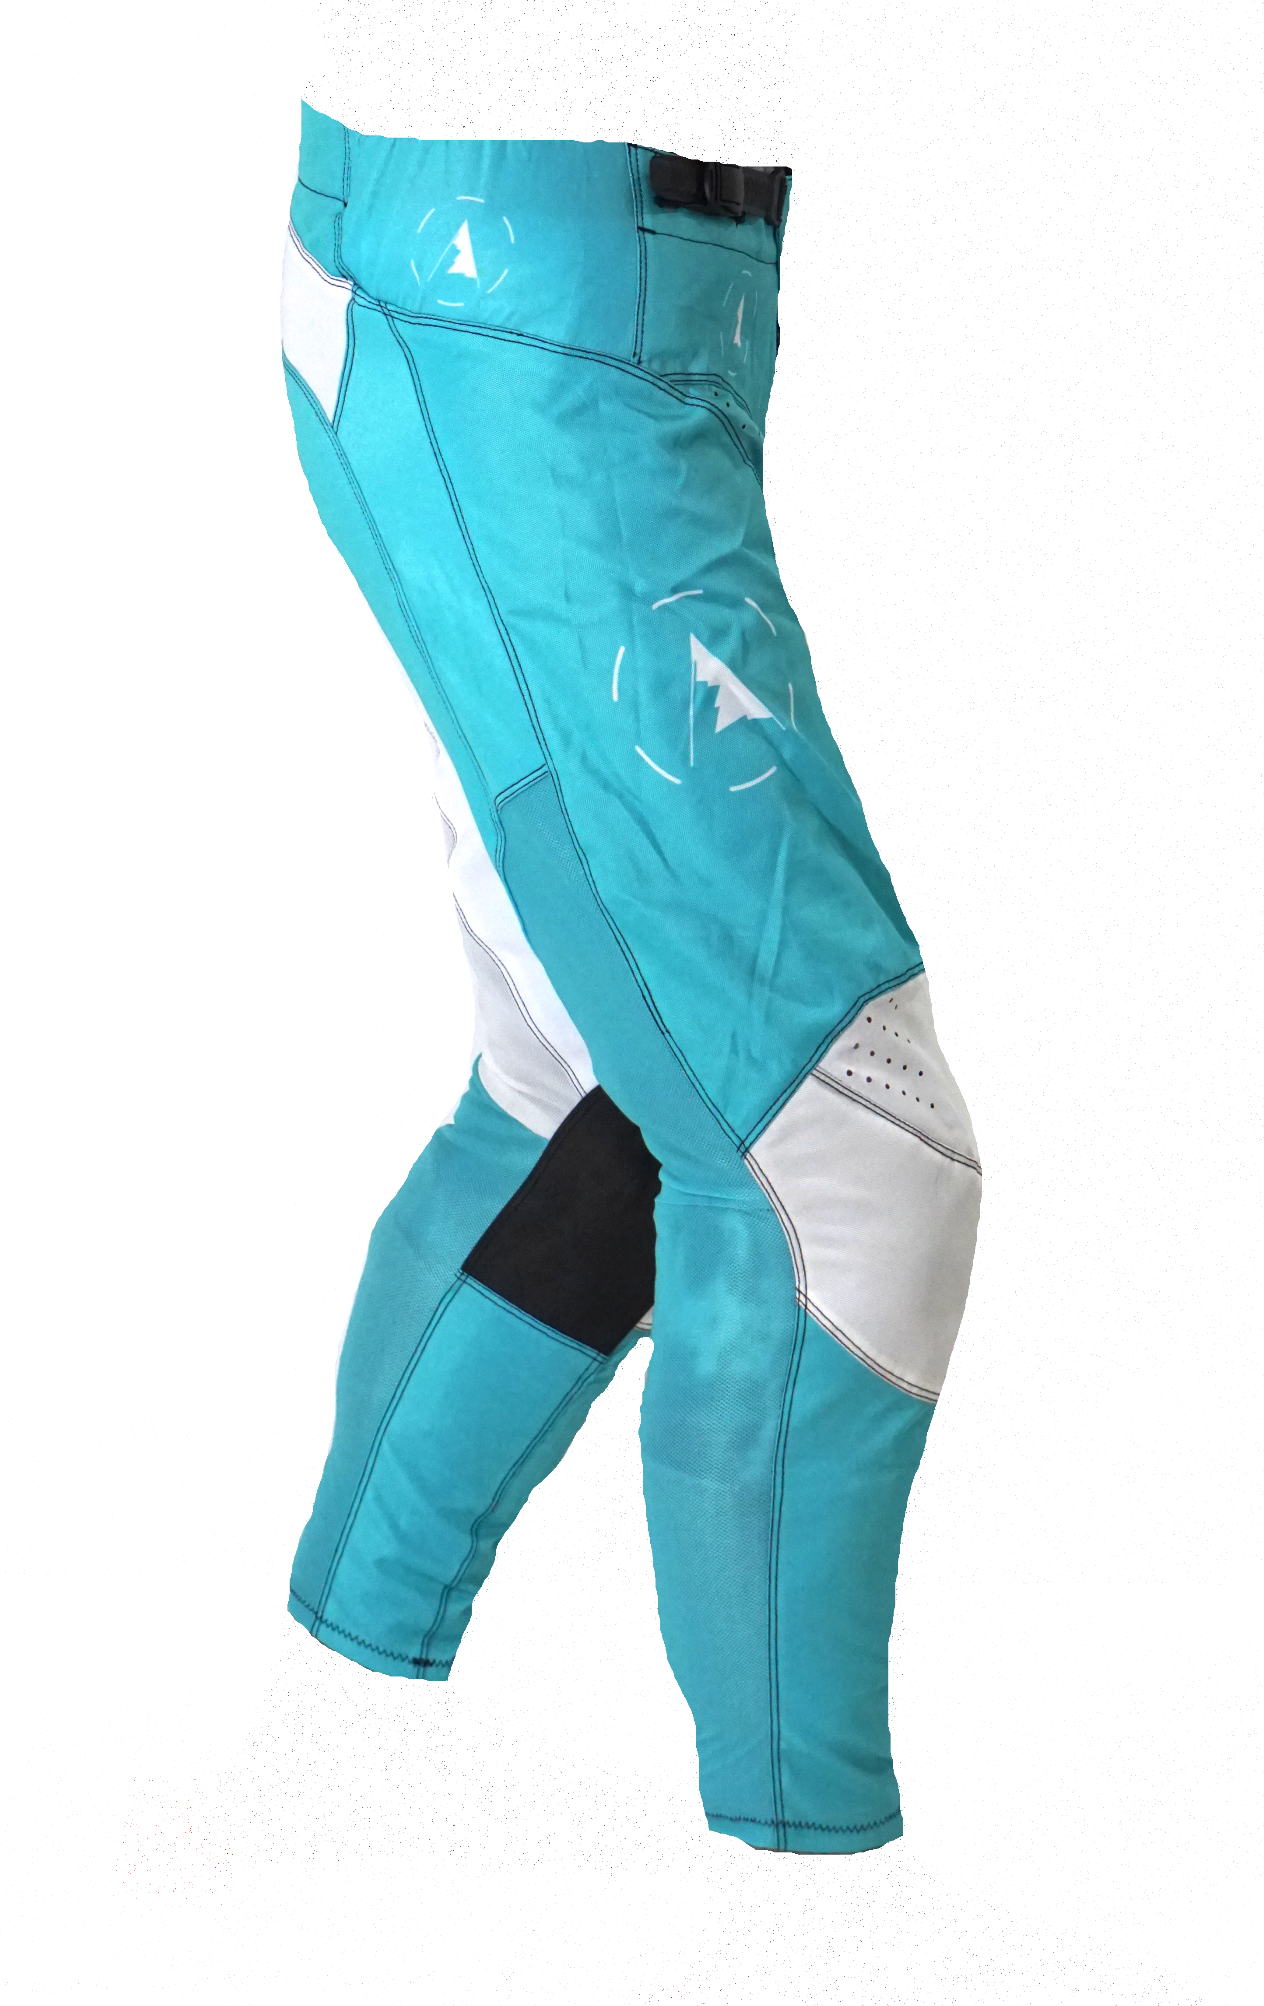 Pants Mx 22 - Turquoise and White